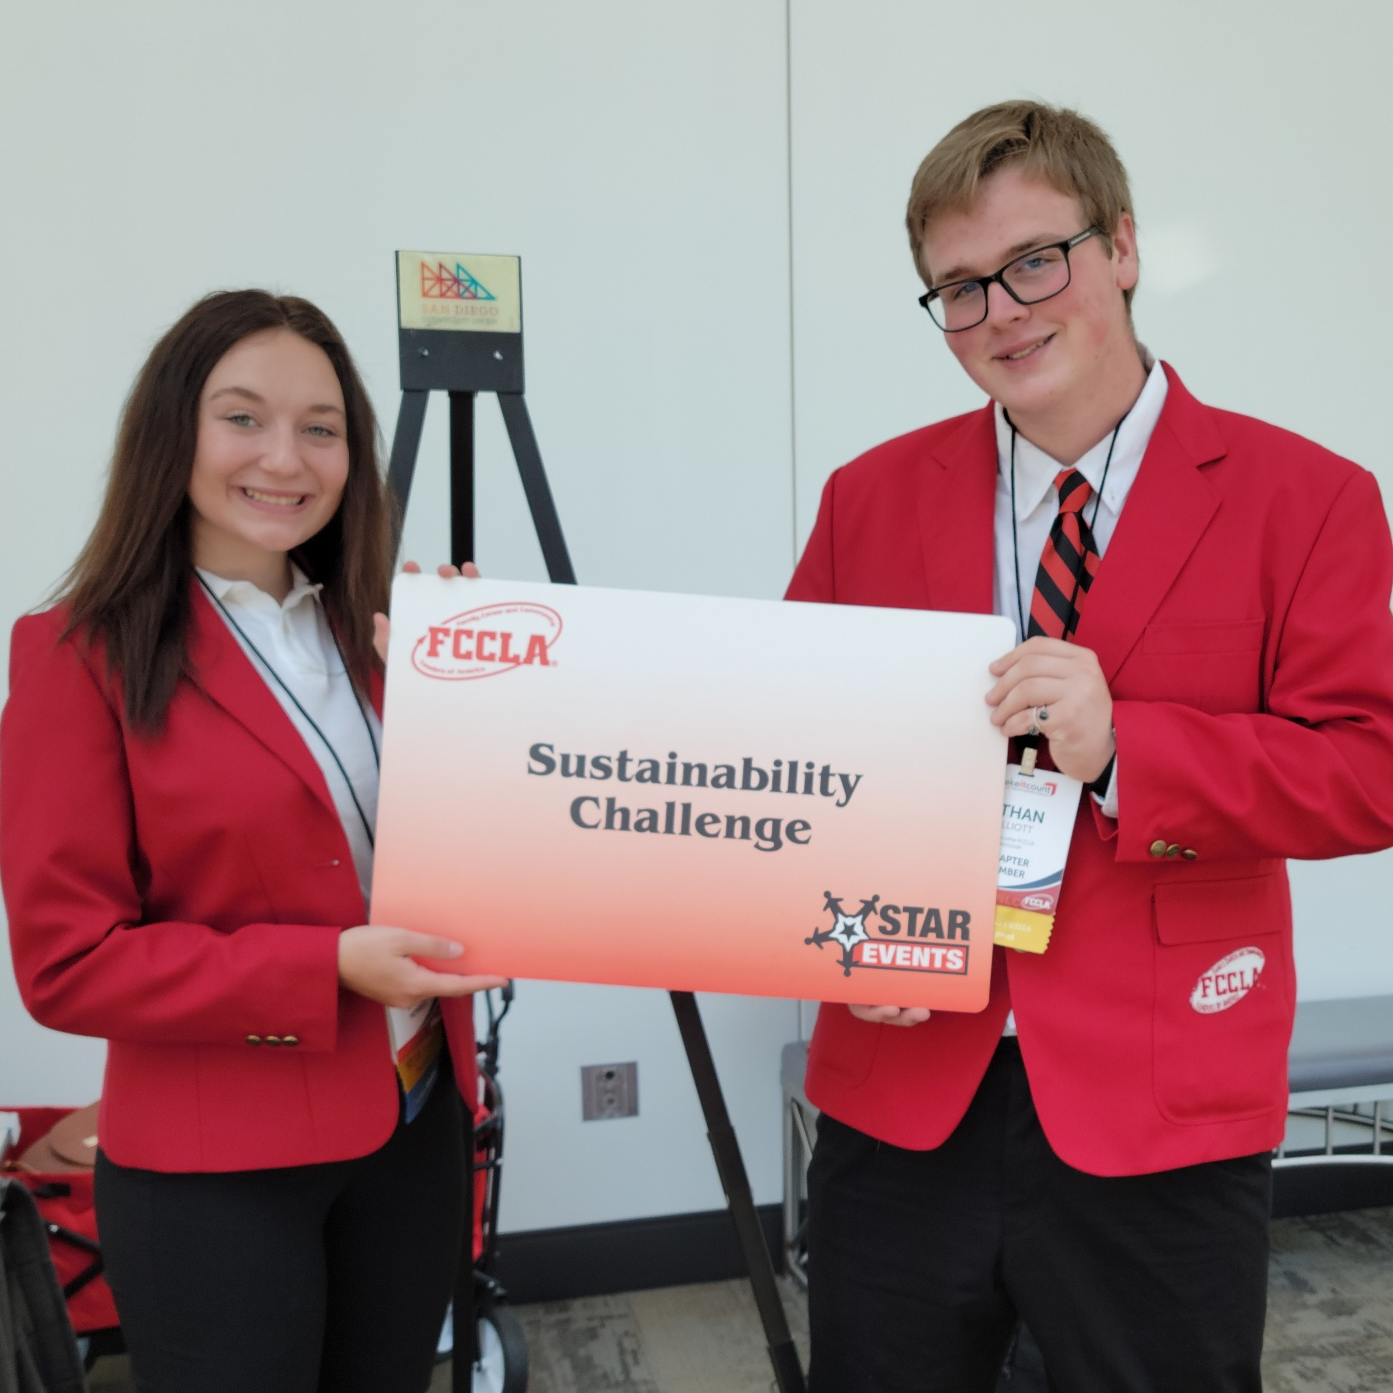 fccla member poses with sustainability challenge poster